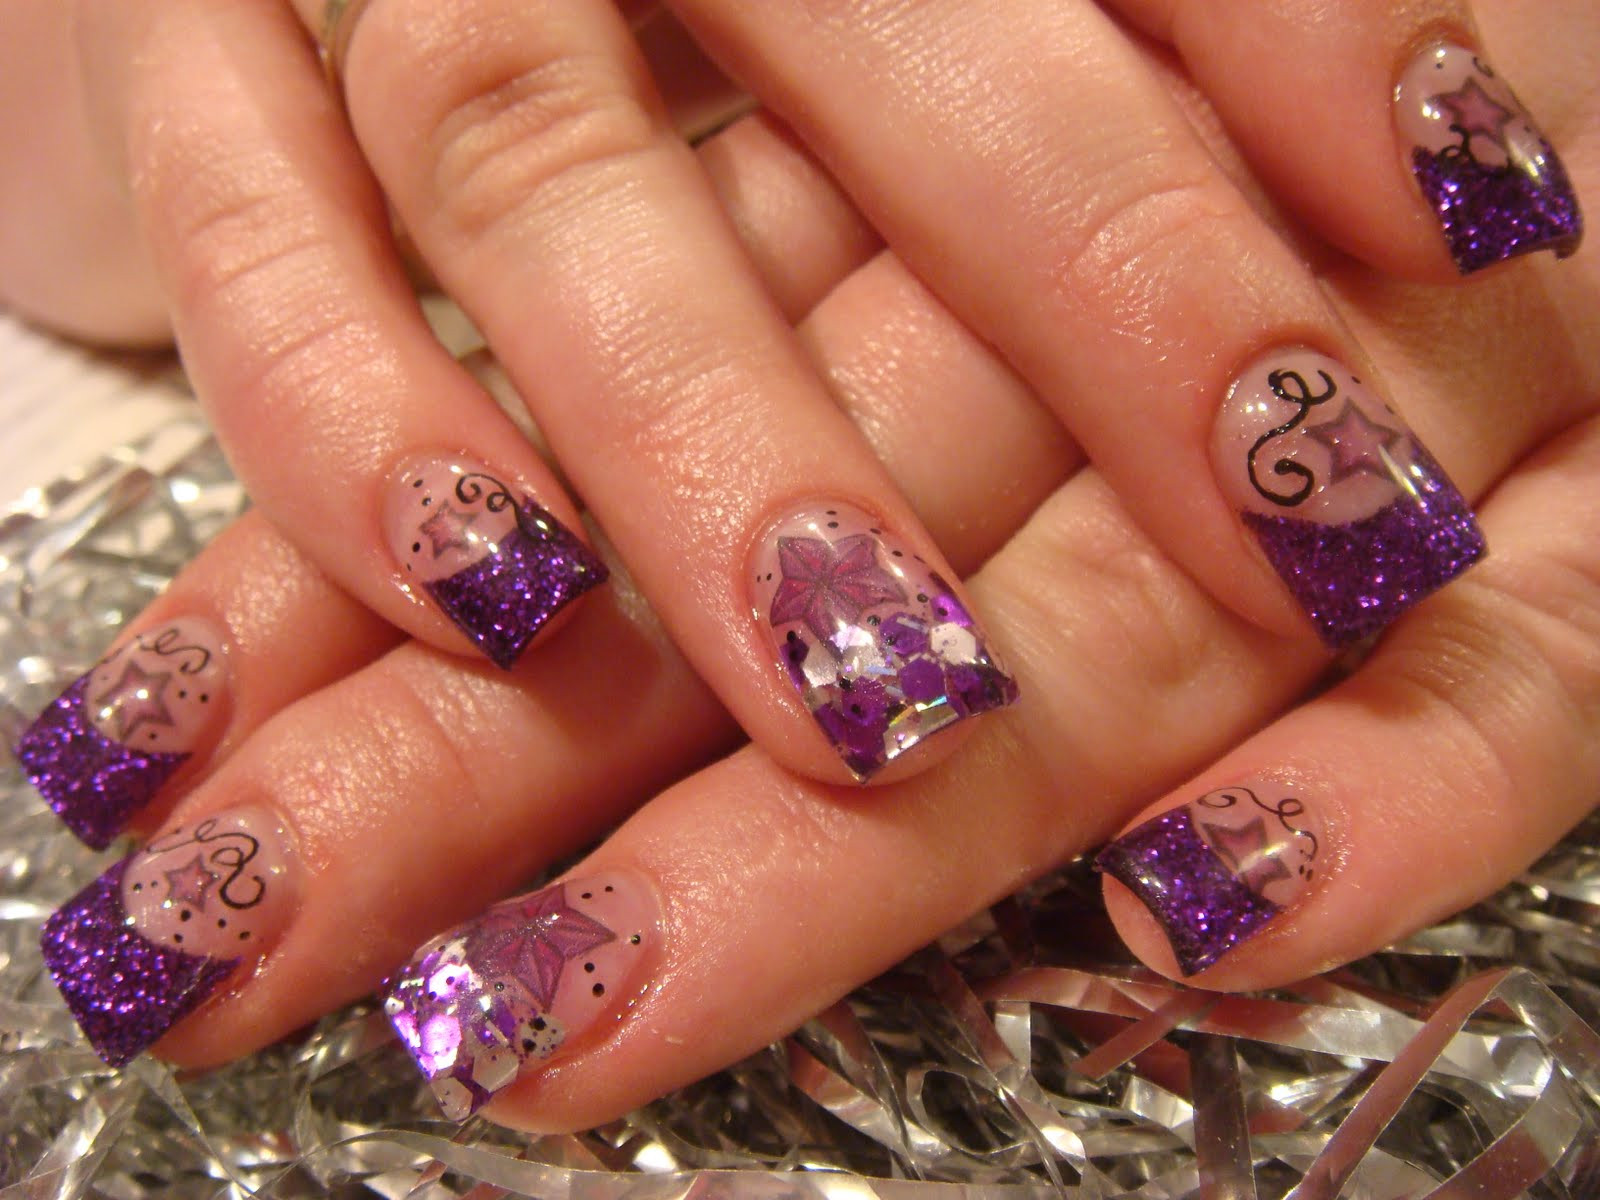 2. Acrylic Nail Designs - wide 2